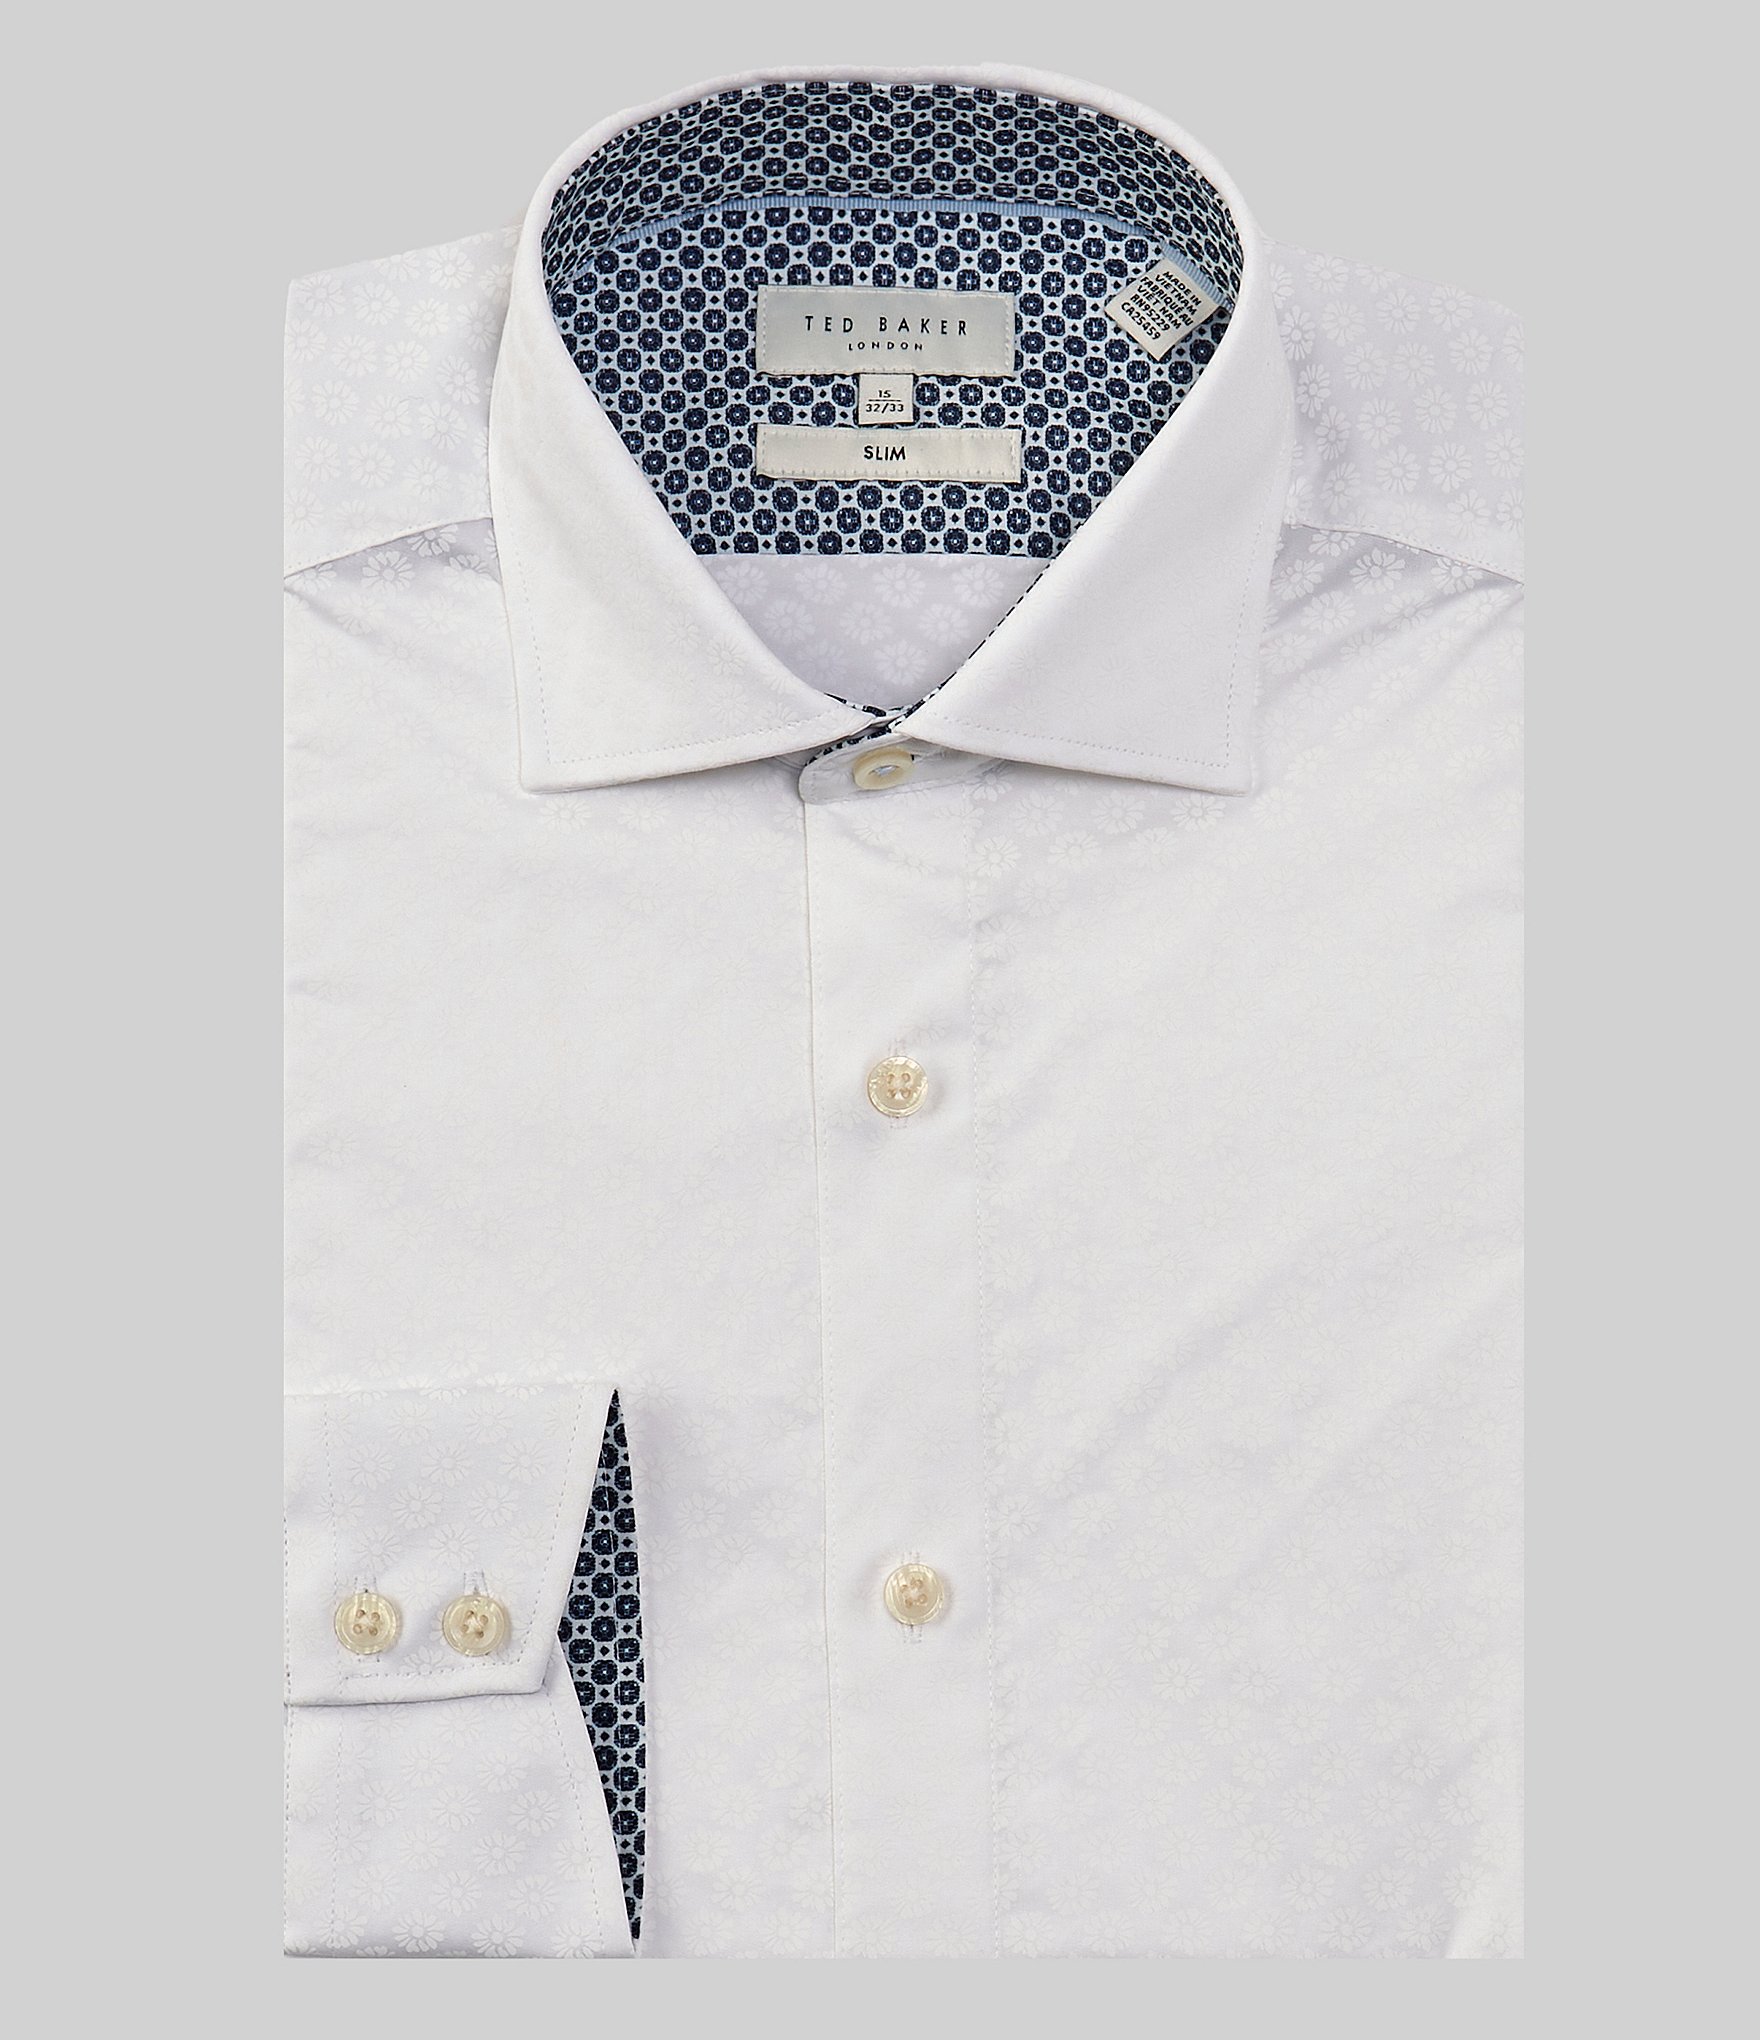 Ted Baker London Slim Fit Stretch Spread Collar Solid Dress Shirt ...